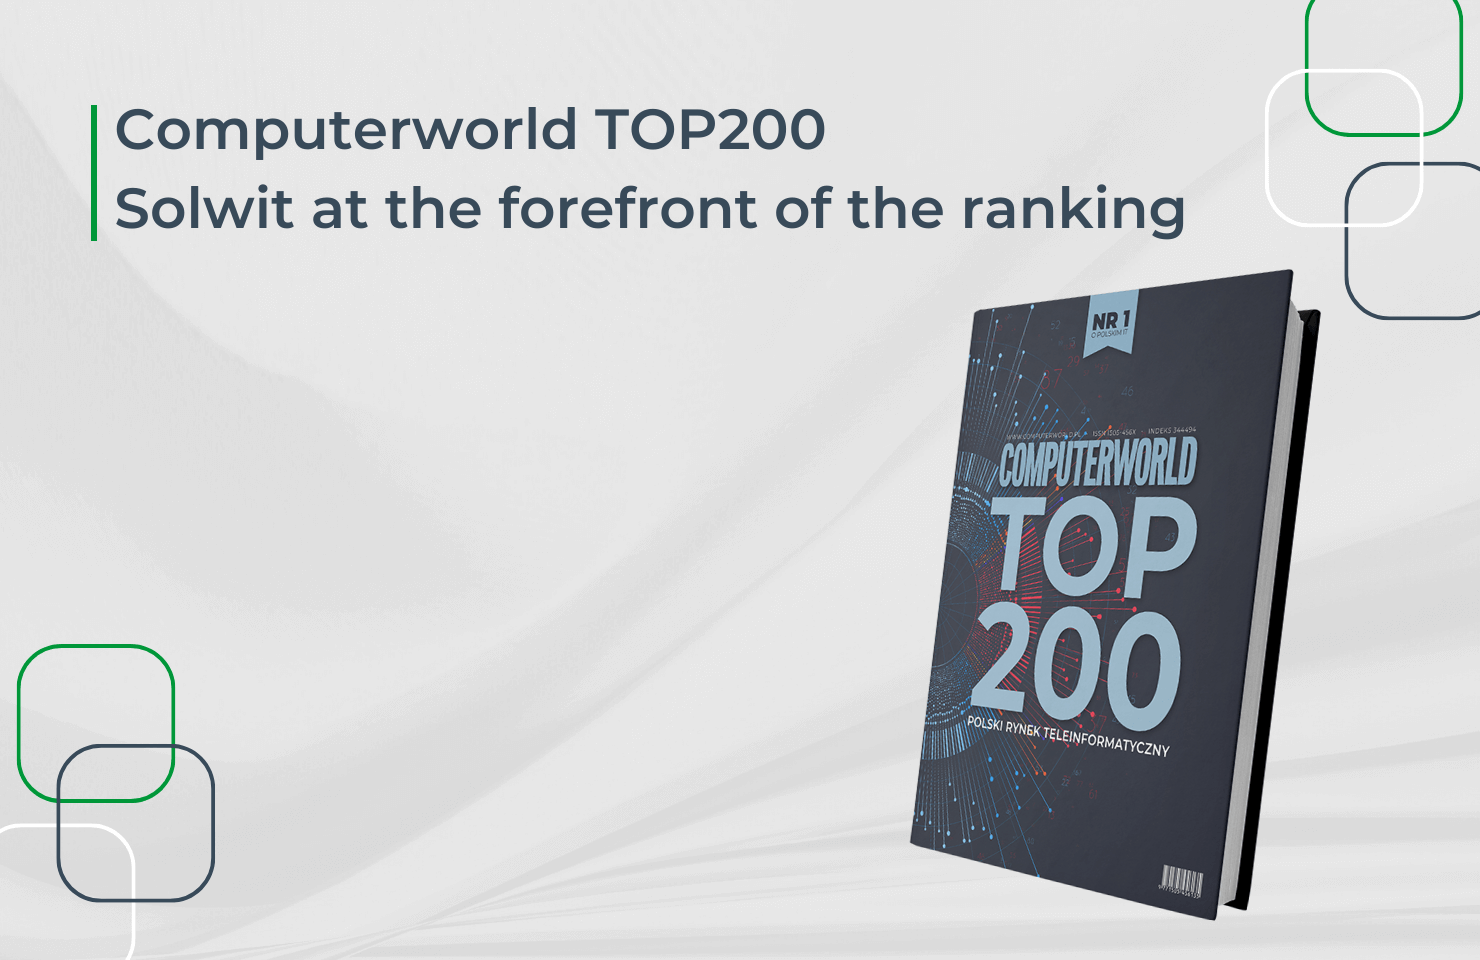 Computerworld TOP200: Solwit at the forefront of the ranking